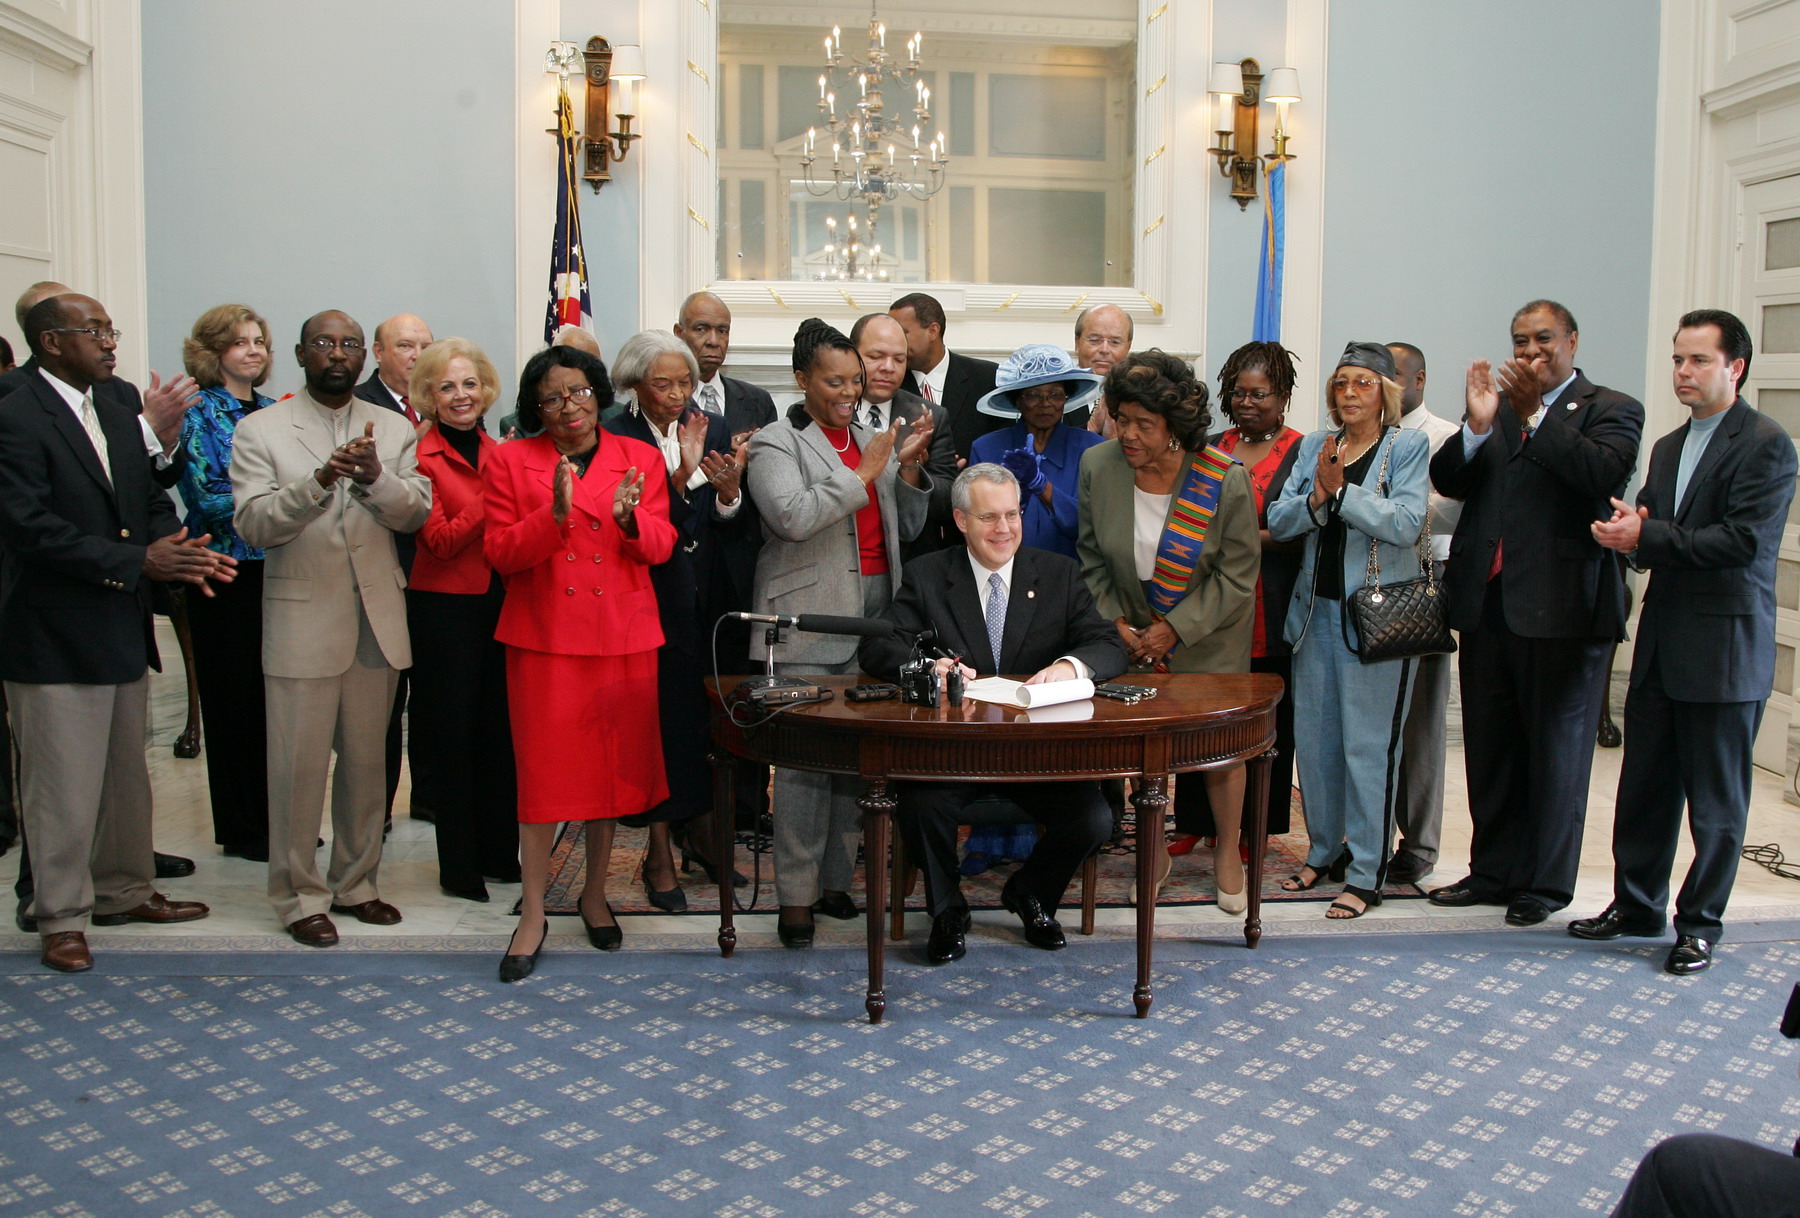 Governor Henry ceremoniously signs Senate Bill 1919 to create the African-American Centennial Plaza..